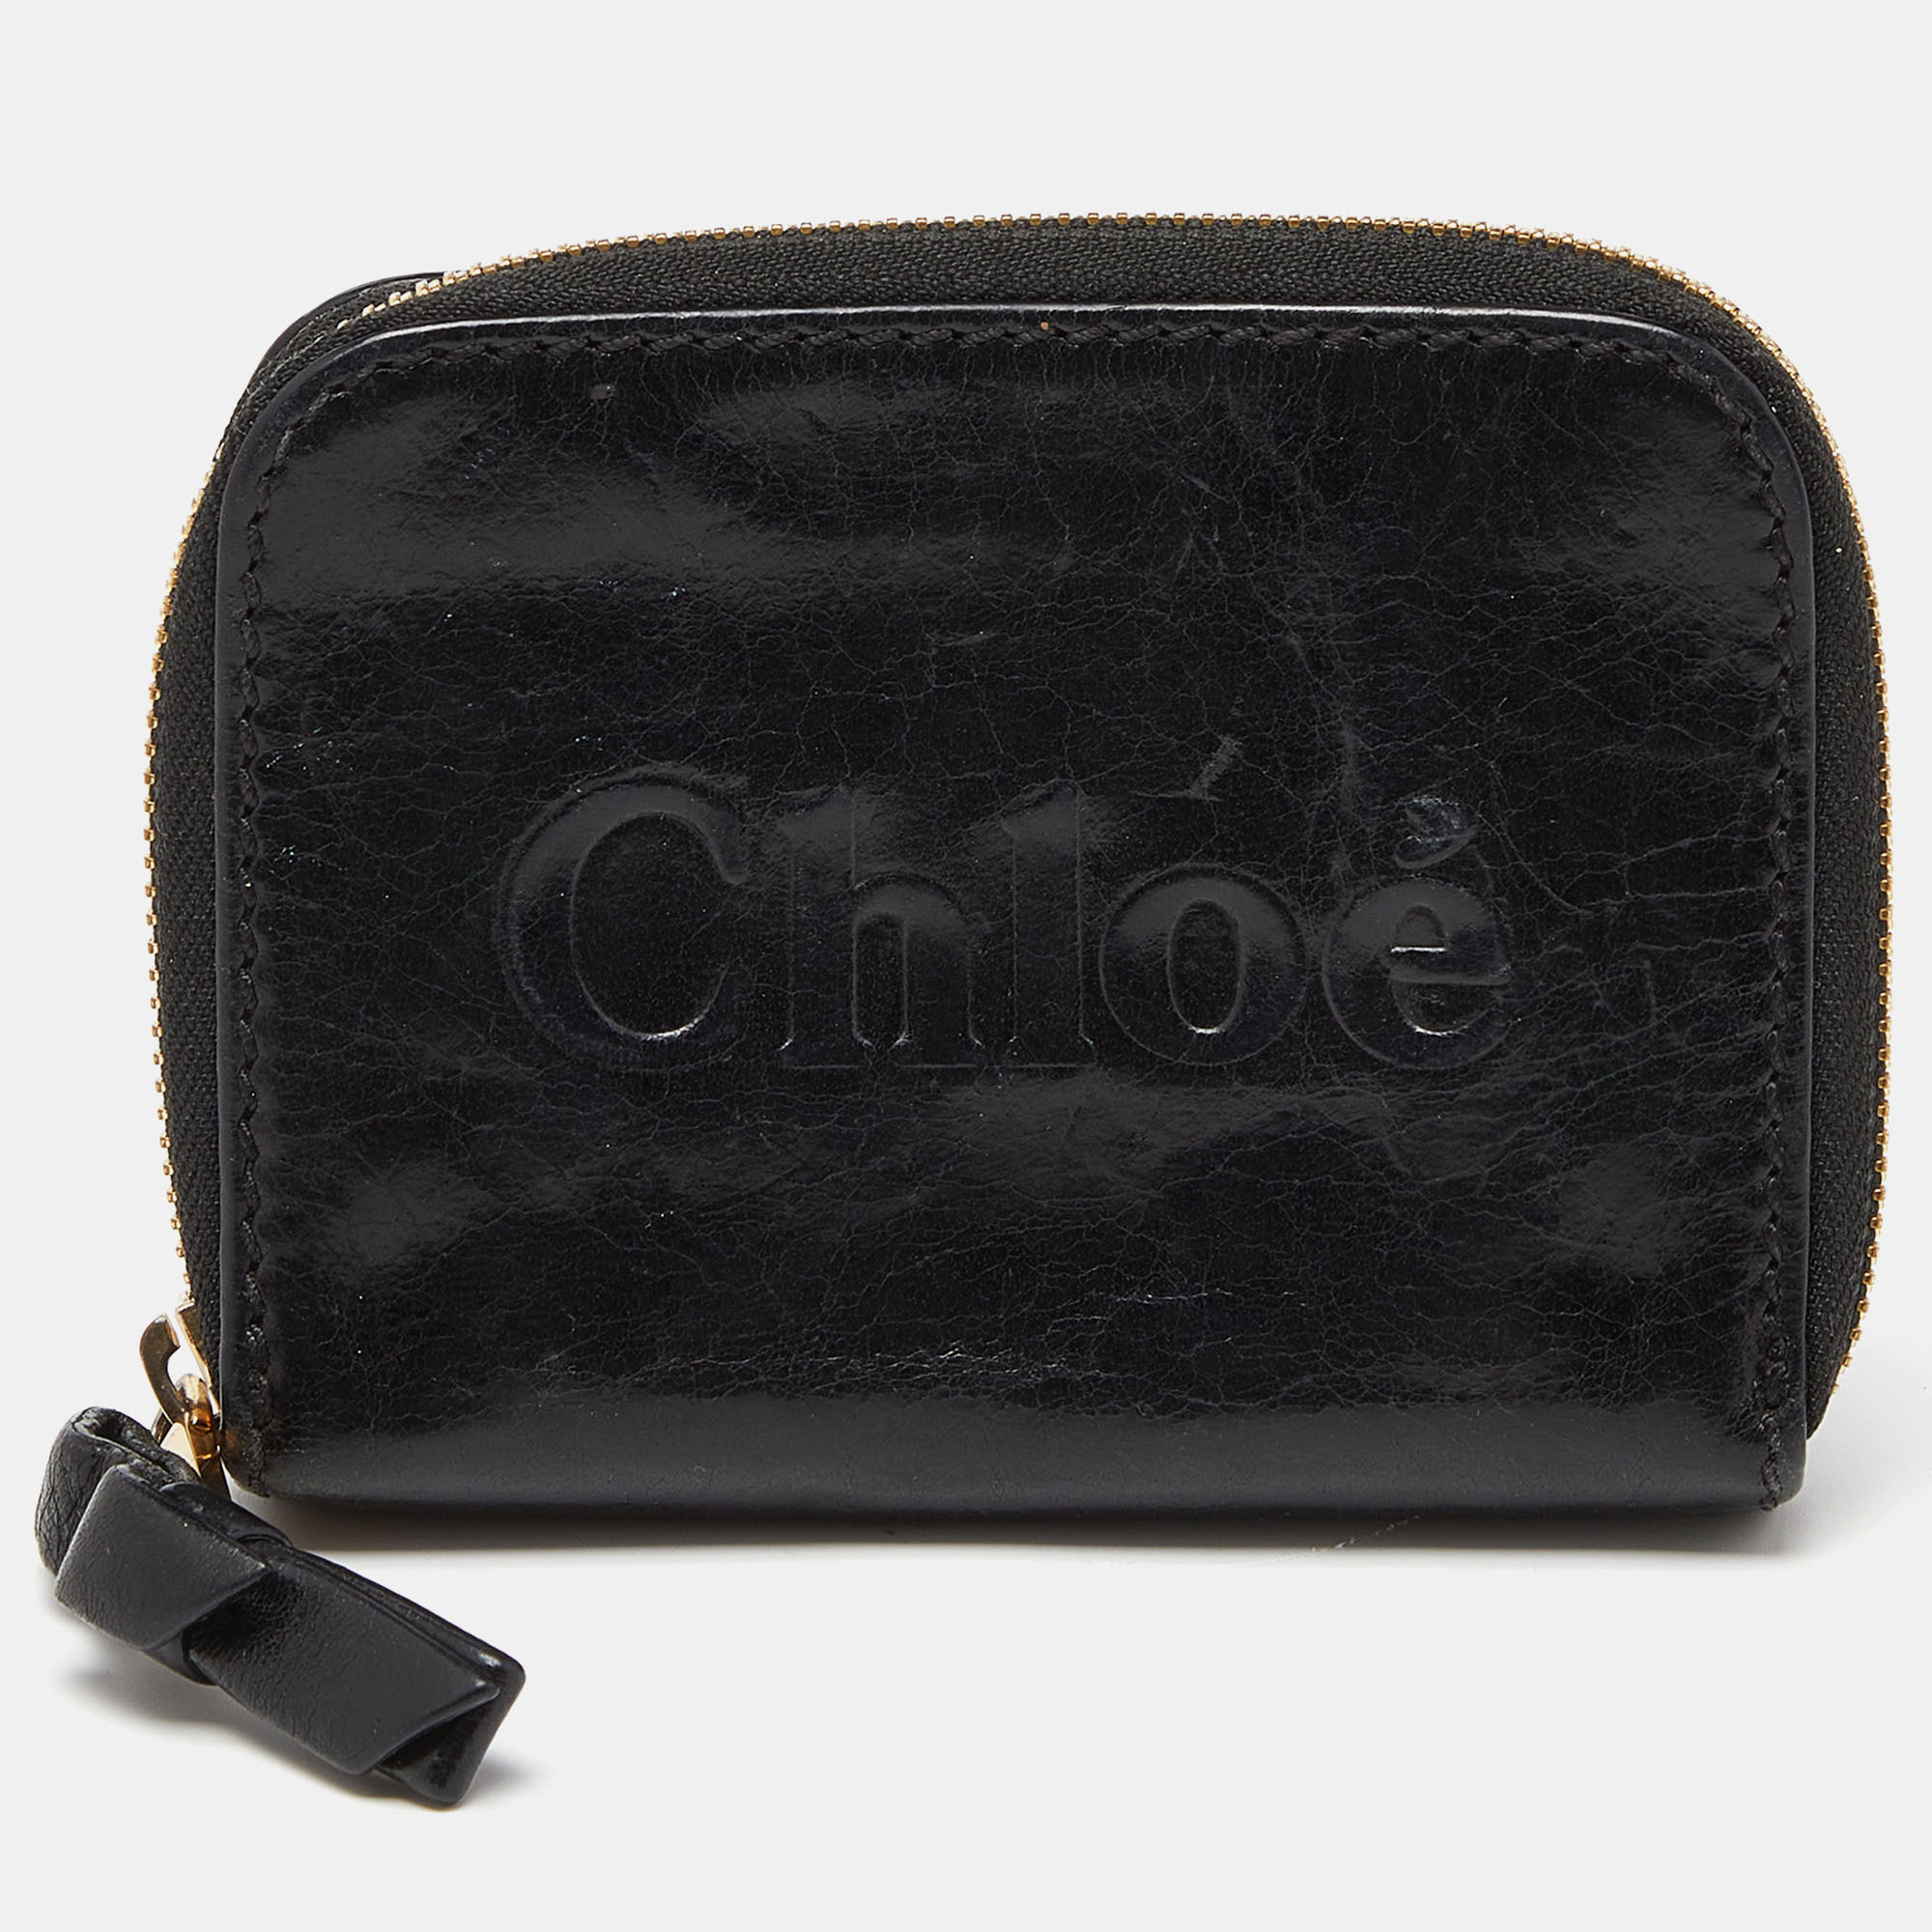 A beautiful wallet for stylish women this branded wallet is perfect to be carried solo or inside your tote while you step out to run errands. It is a durable accessory.